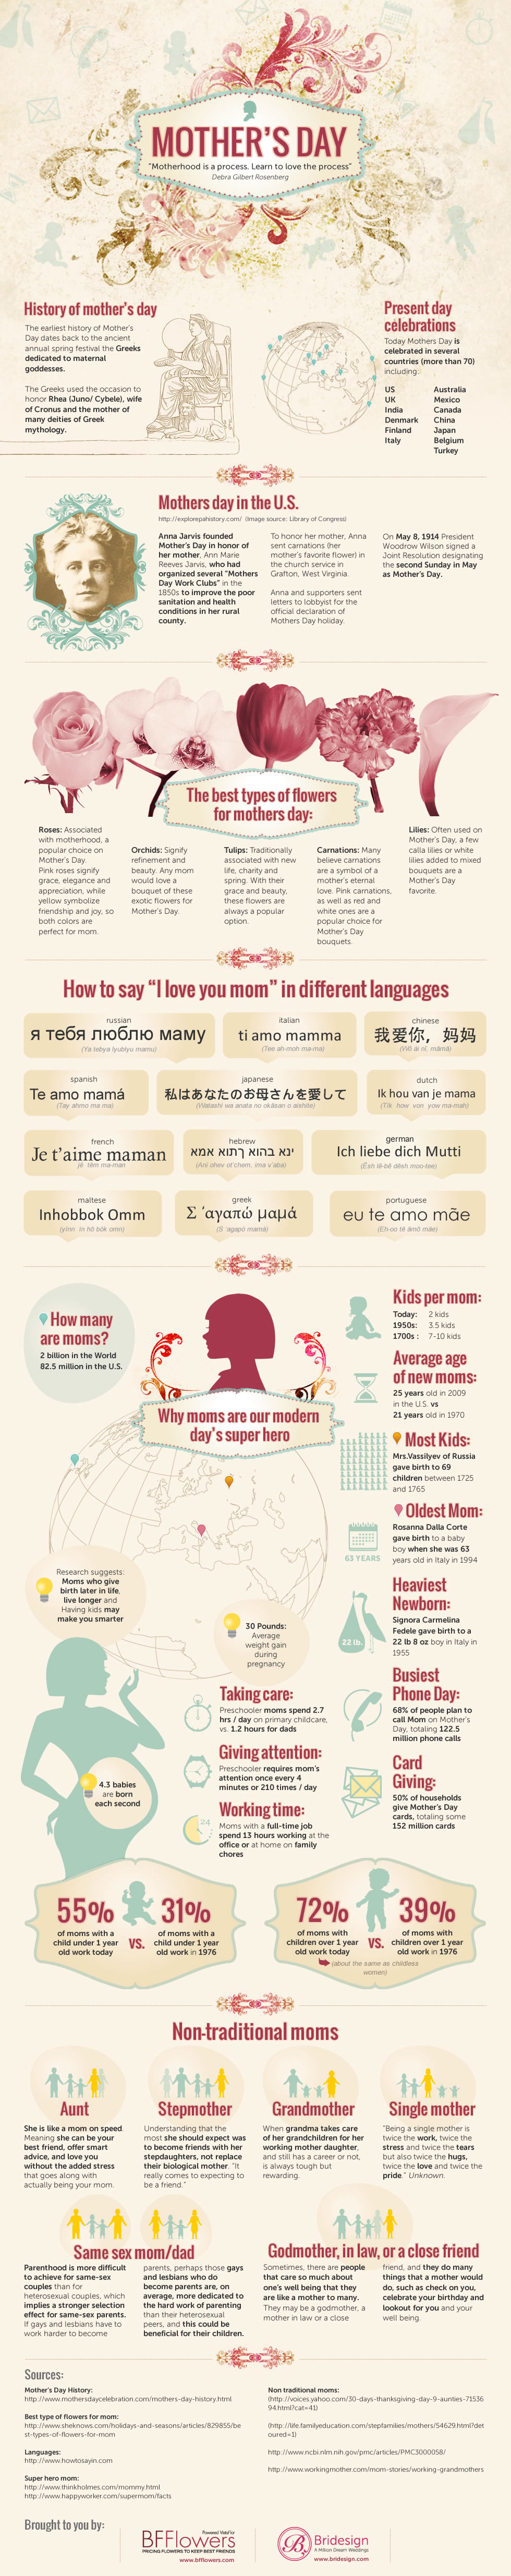 mothers-day-infographic